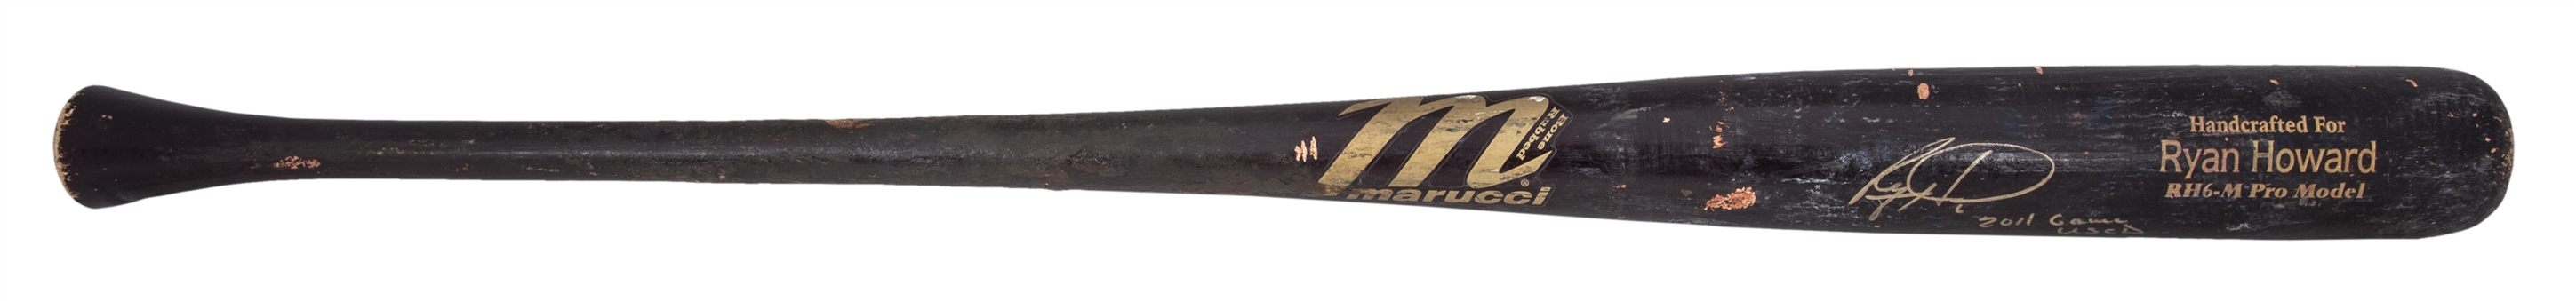 2011 Ryan Howard Game Used and Signed Marucci Bat Photomatched to April 27 and 29, 2011 to Hit Three Home Runs Including Grand Slam (Resolution Photomatching, PSA/DNA GU 10 and JSA) 